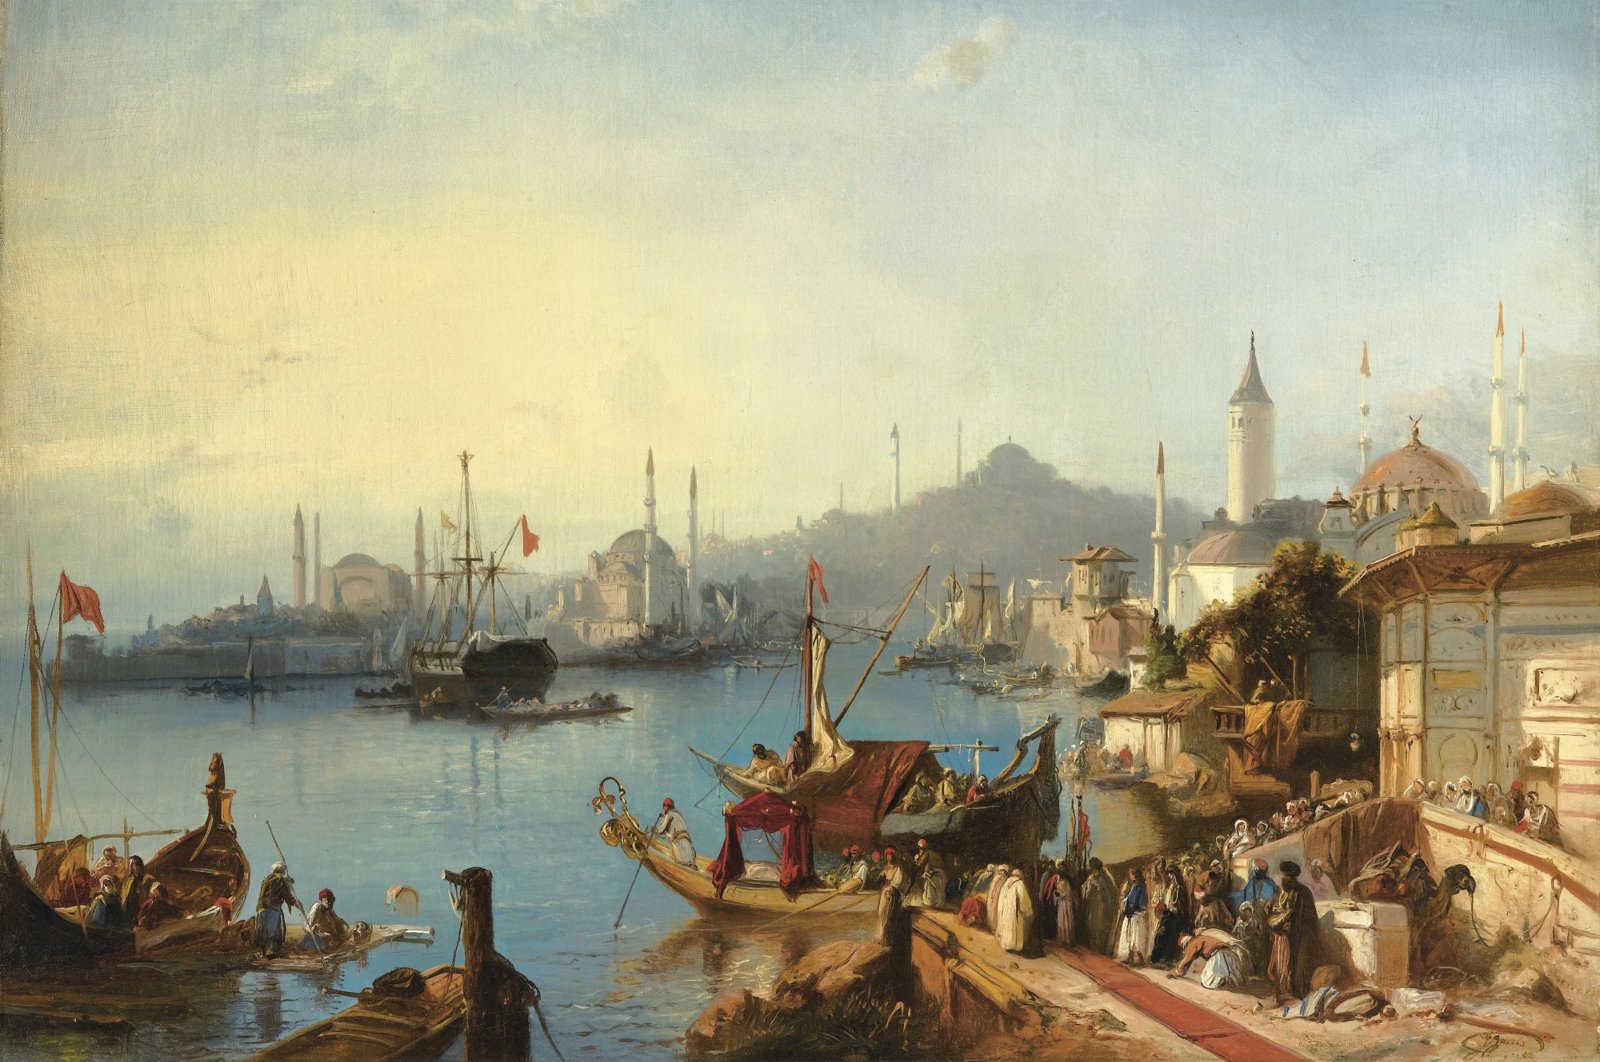 A painting by the famous Belgian Orientalist artist Jacobus Albertus Michael Jacobs, known as Jacob Jacobs, shows a view of Istanbul during the Ottoman Empire period in 1842. (Photo by Getty Images)